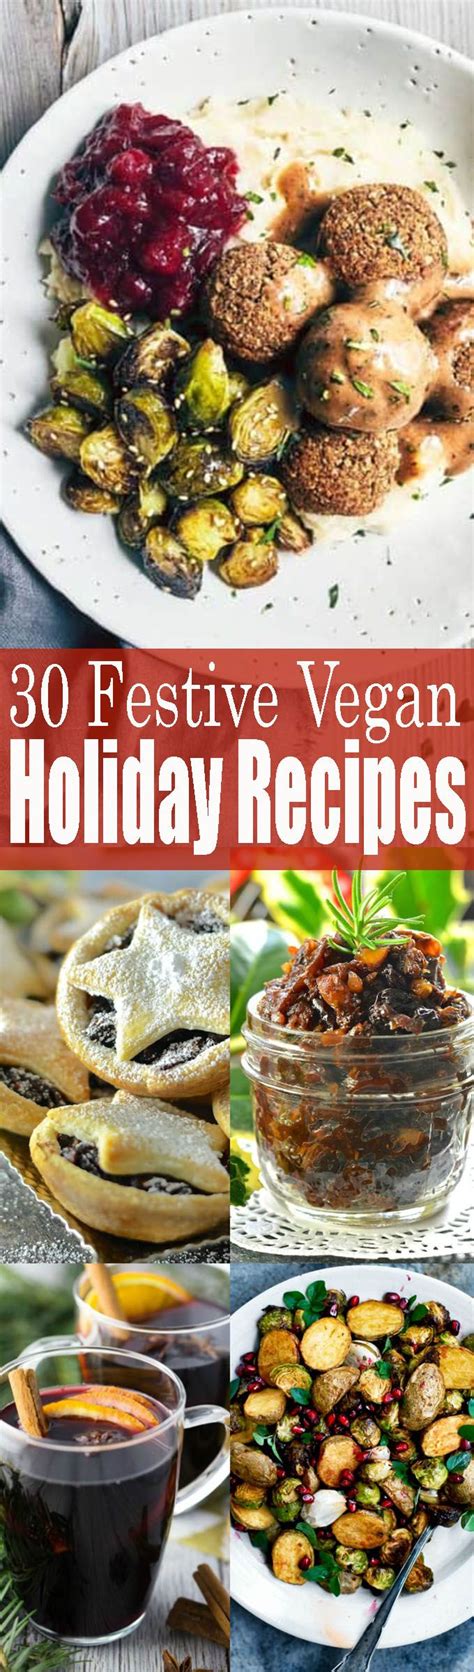 Some of these recipes use creative ways to keep out refined sugars. If you're looking for vegan Christmas recipes, this is the ...